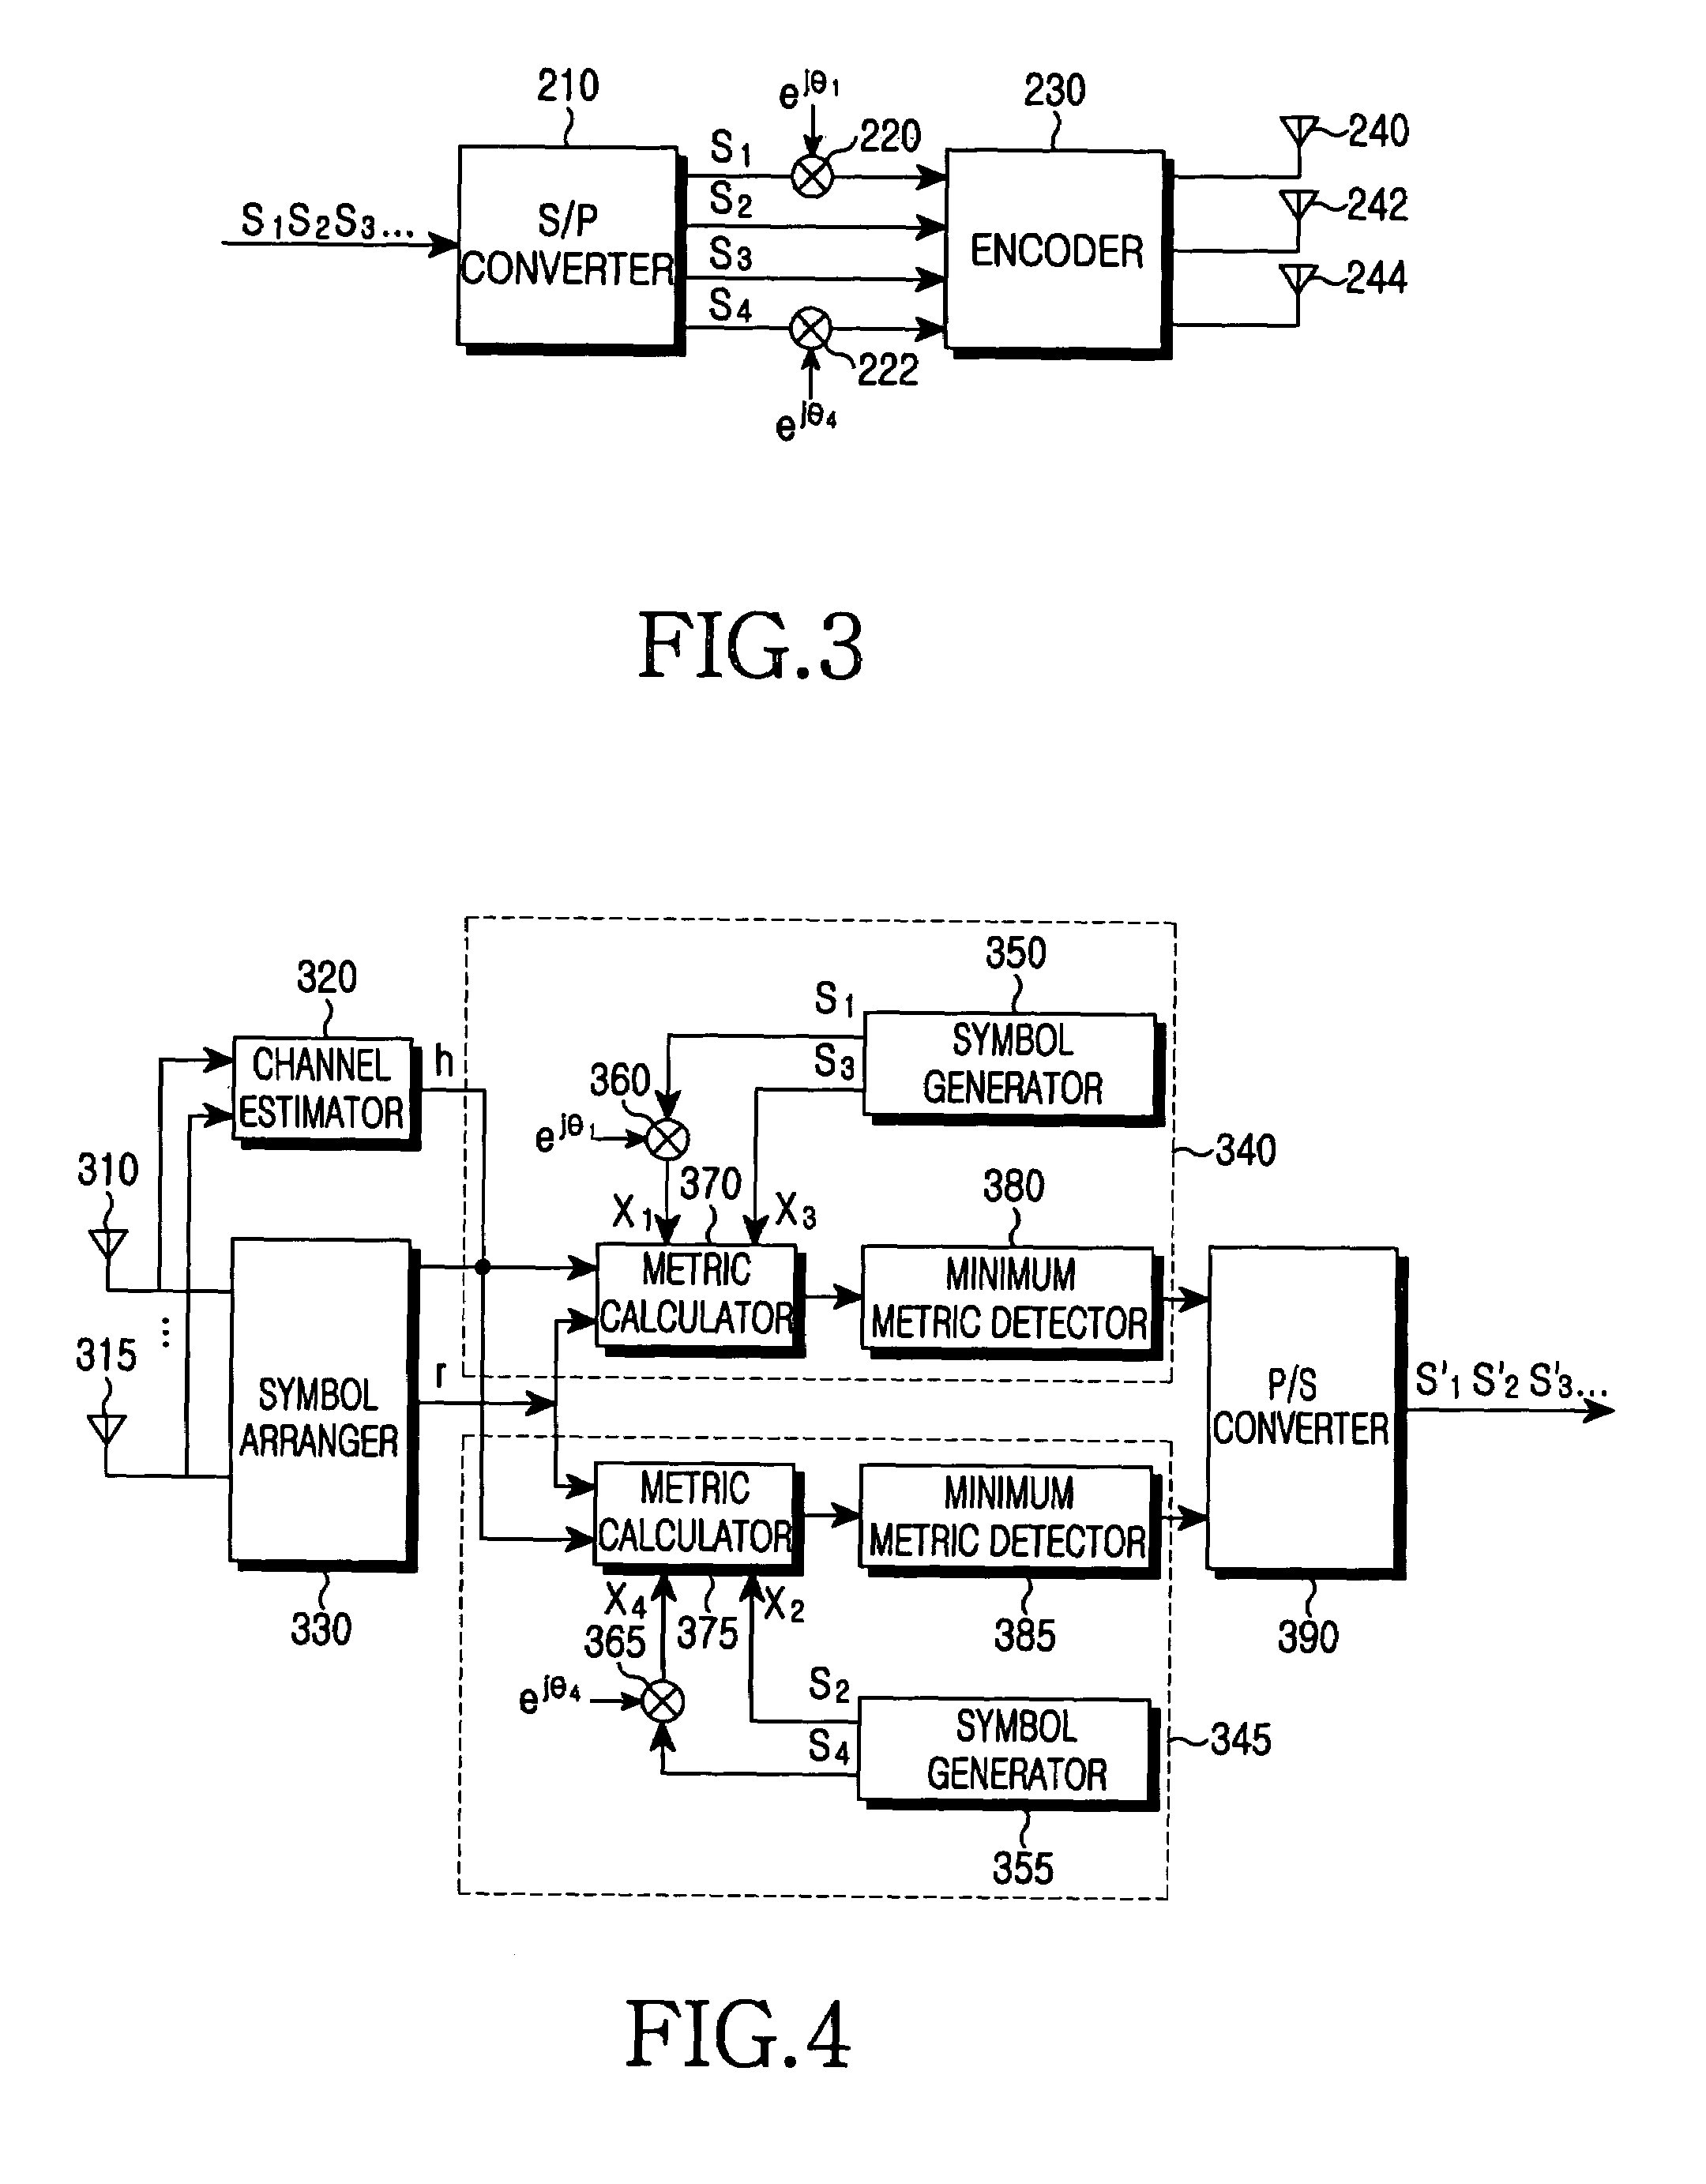 Receiving apparatus in a radio communication system using at least three transmitter antennas